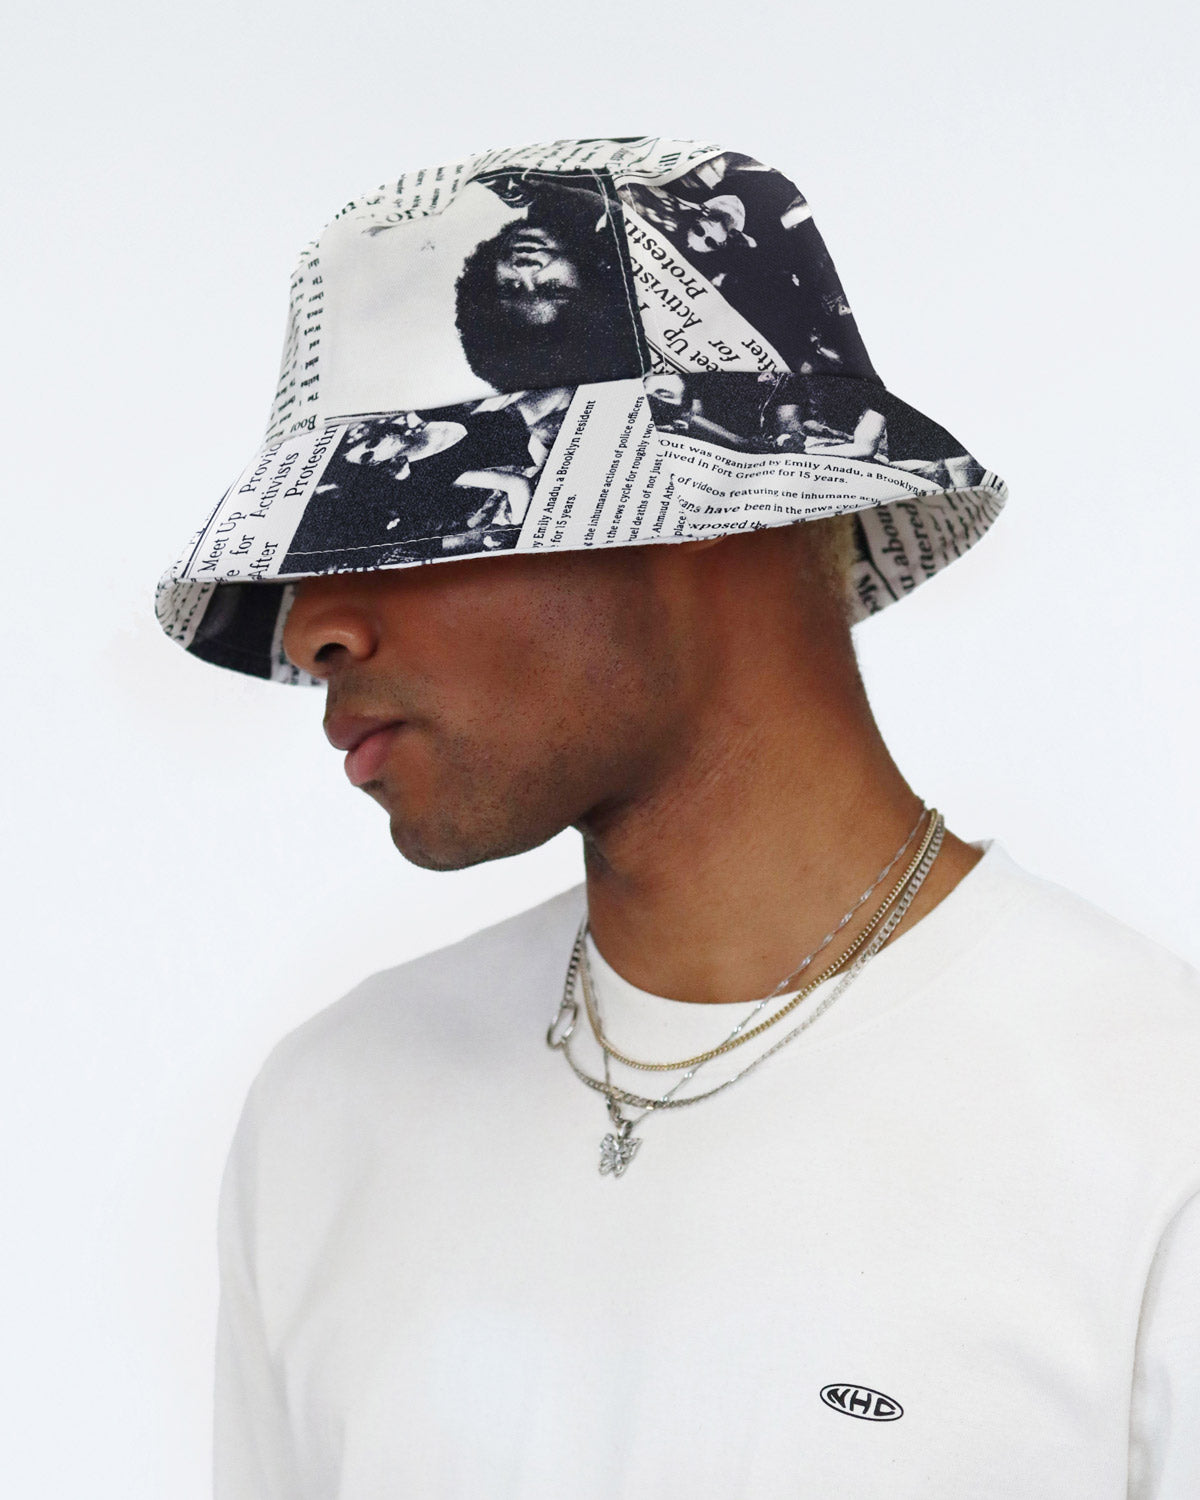 Cult item: Bucket Hat, A Style History Lesson